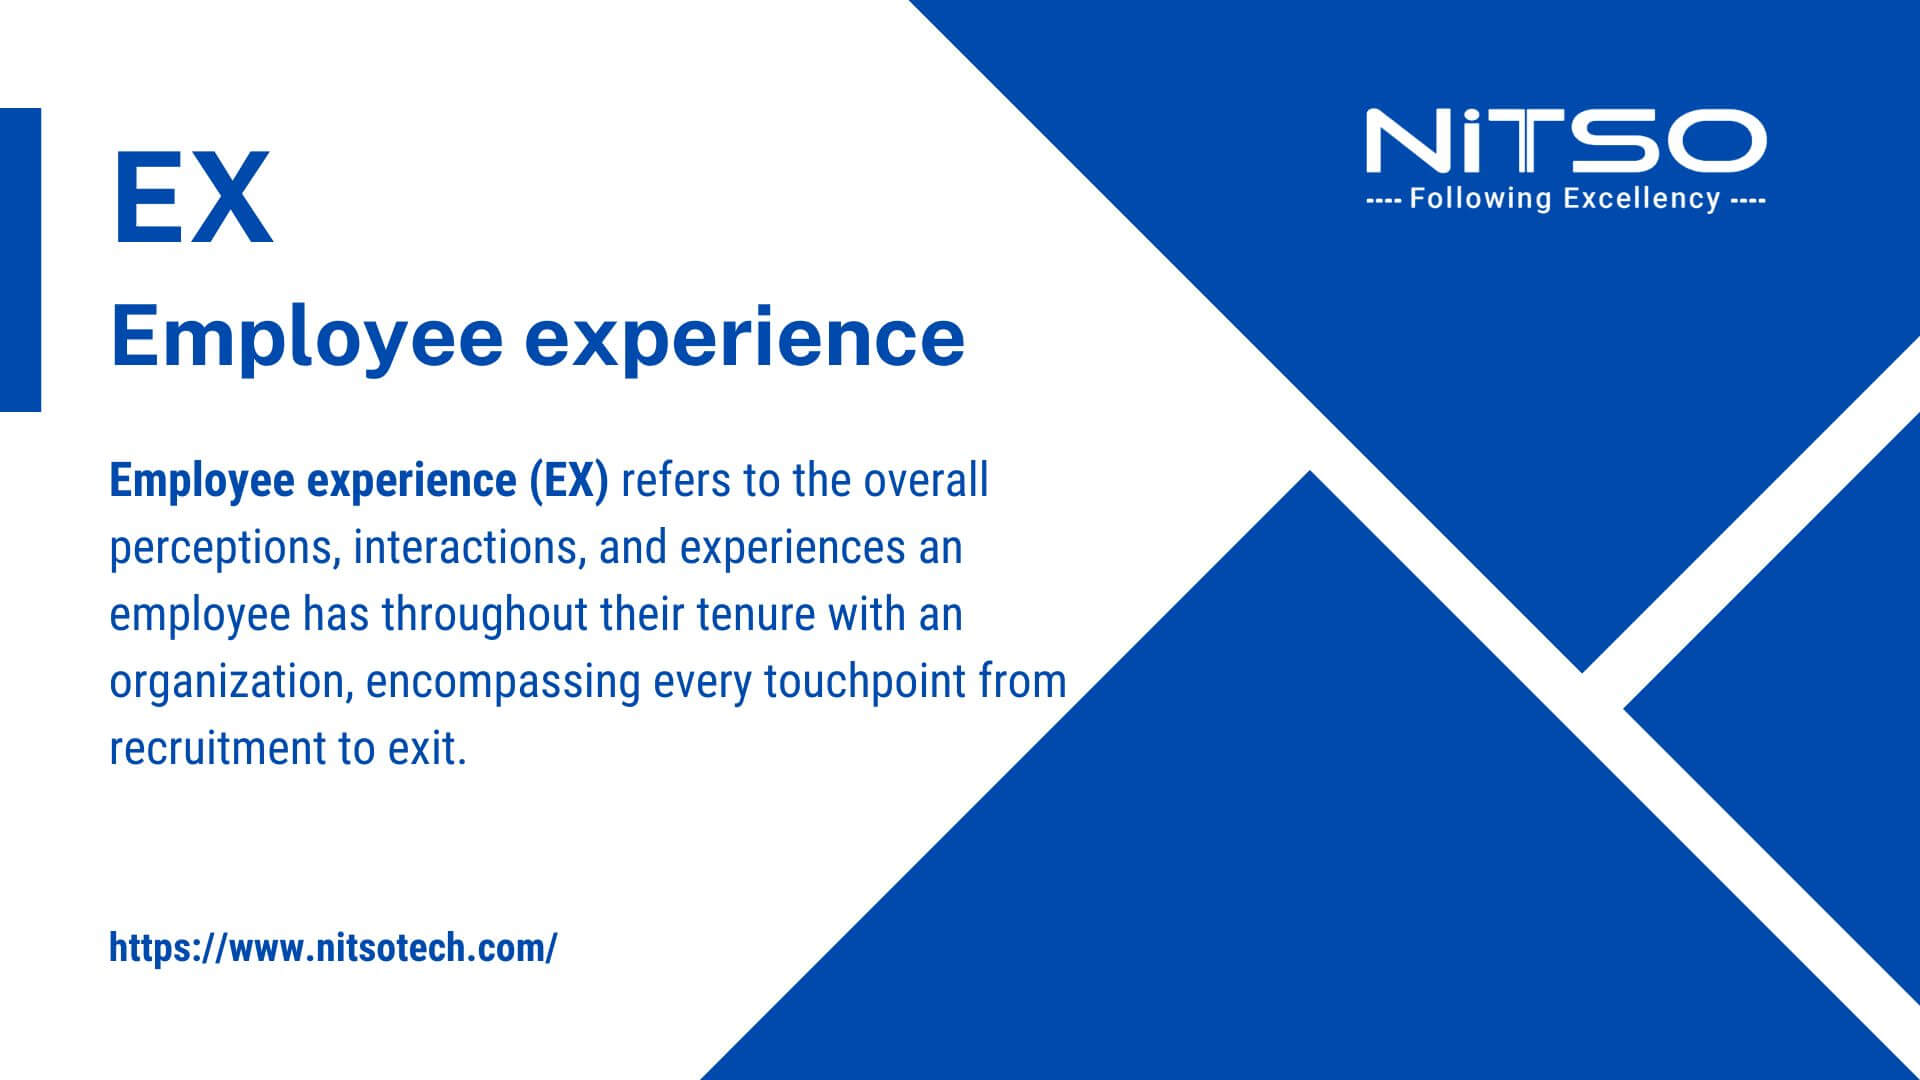 What is Employee Experience (EX)?